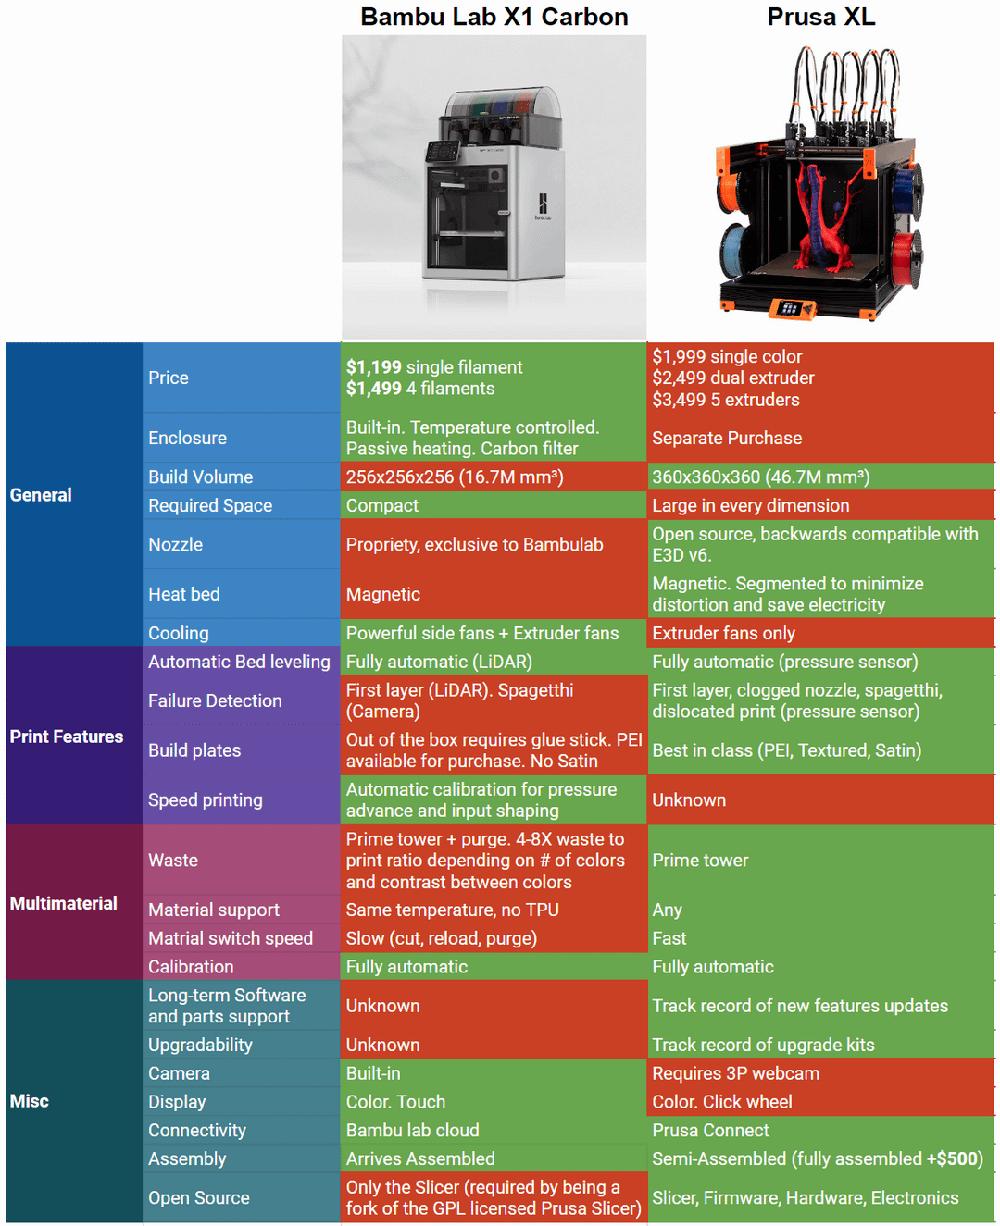 A comparison chart of the features of the Bambu Lab X1 Carbon and the Prusa XL 3D printers.